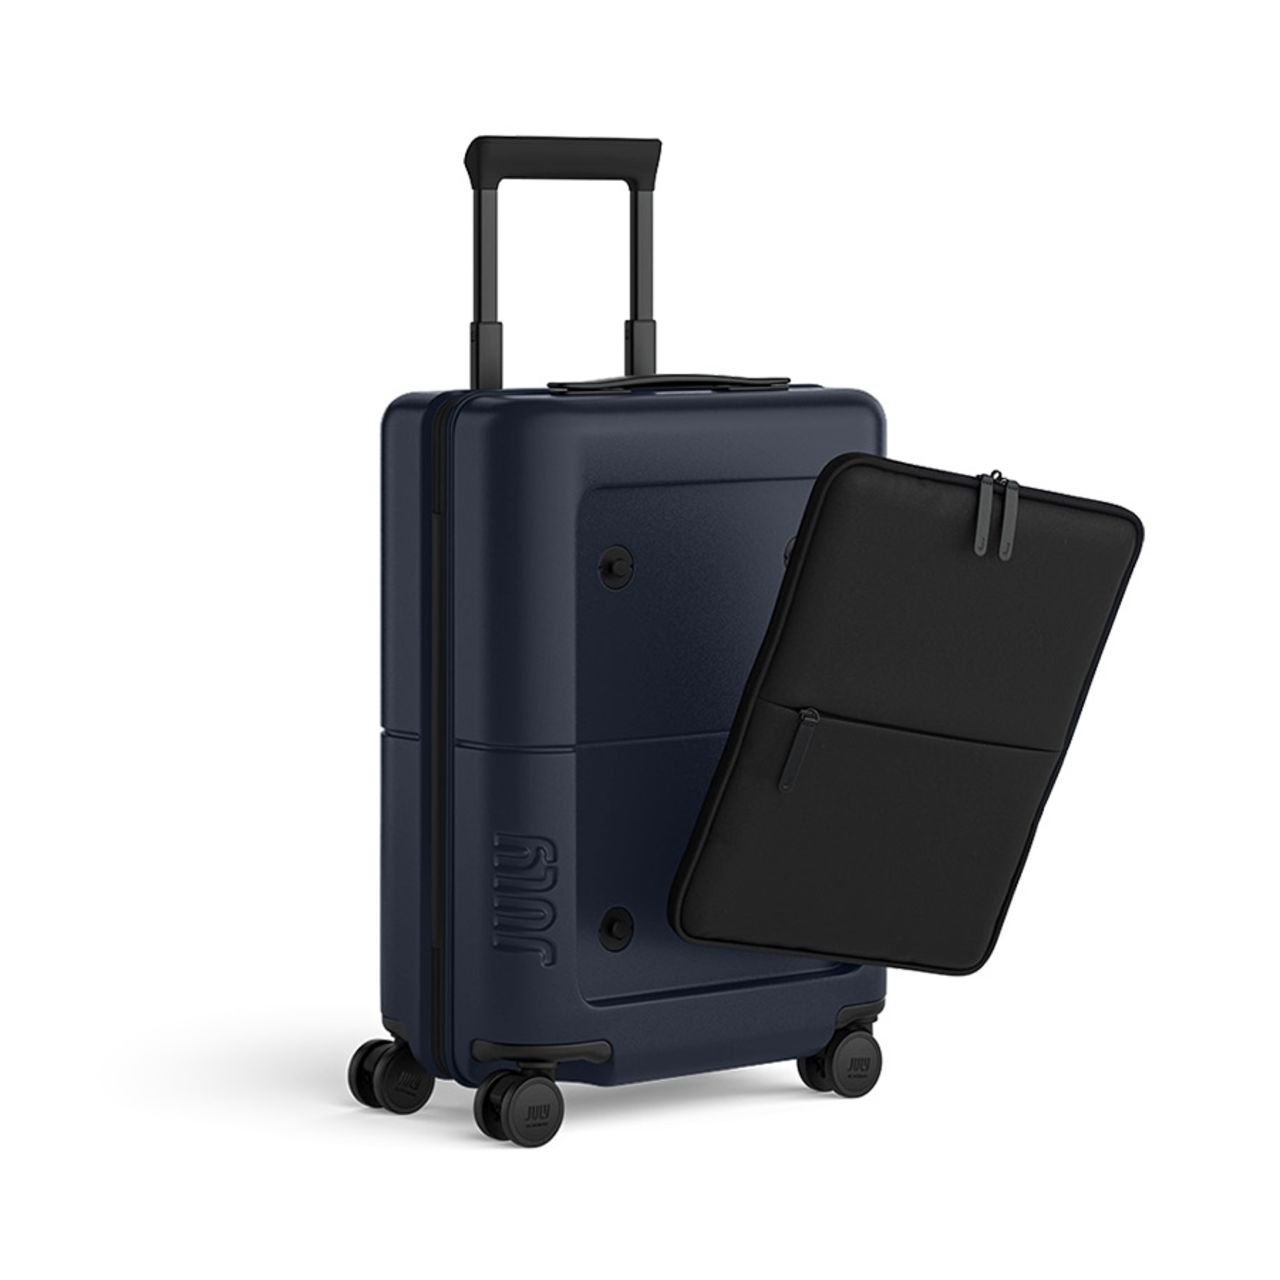 July Carry-On Pro SnapSleeve Luggage review